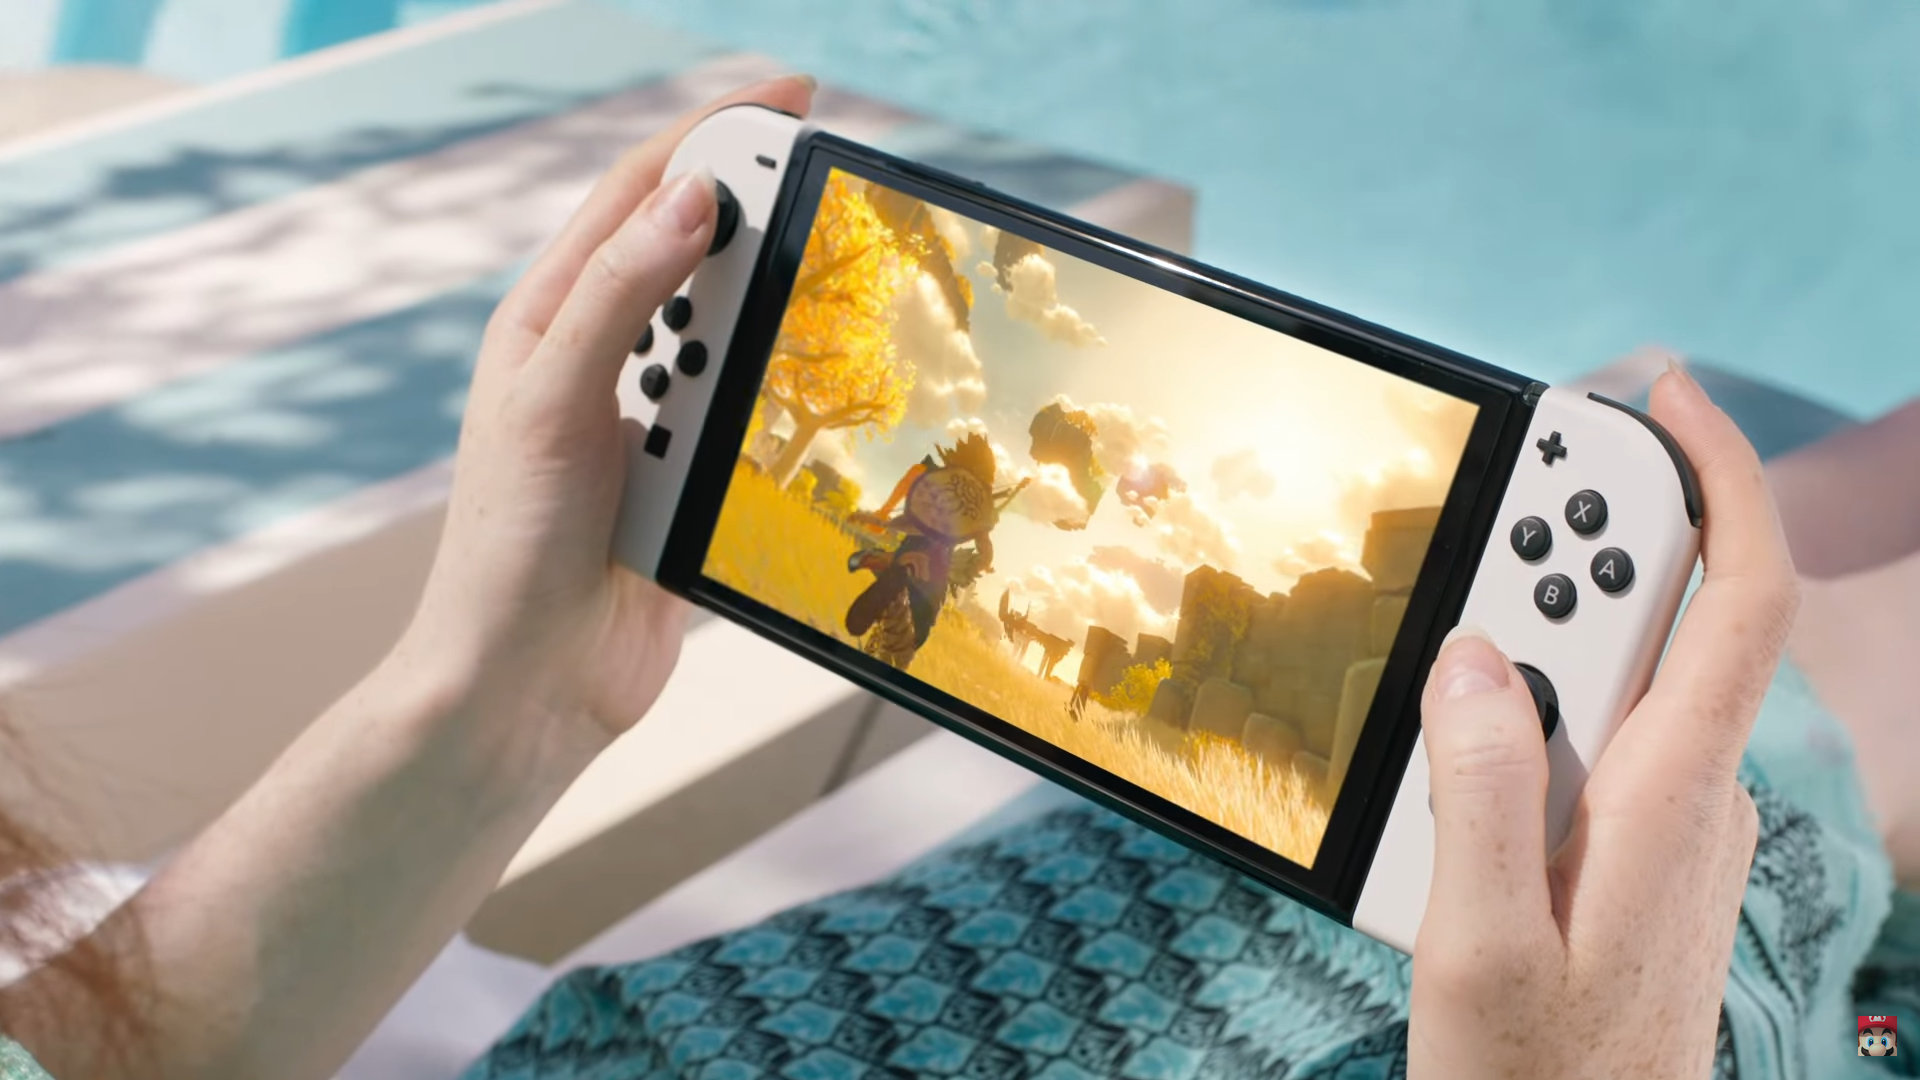 Can the Nintendo Switch OLED compete with the rise in handheld gaming PCs?